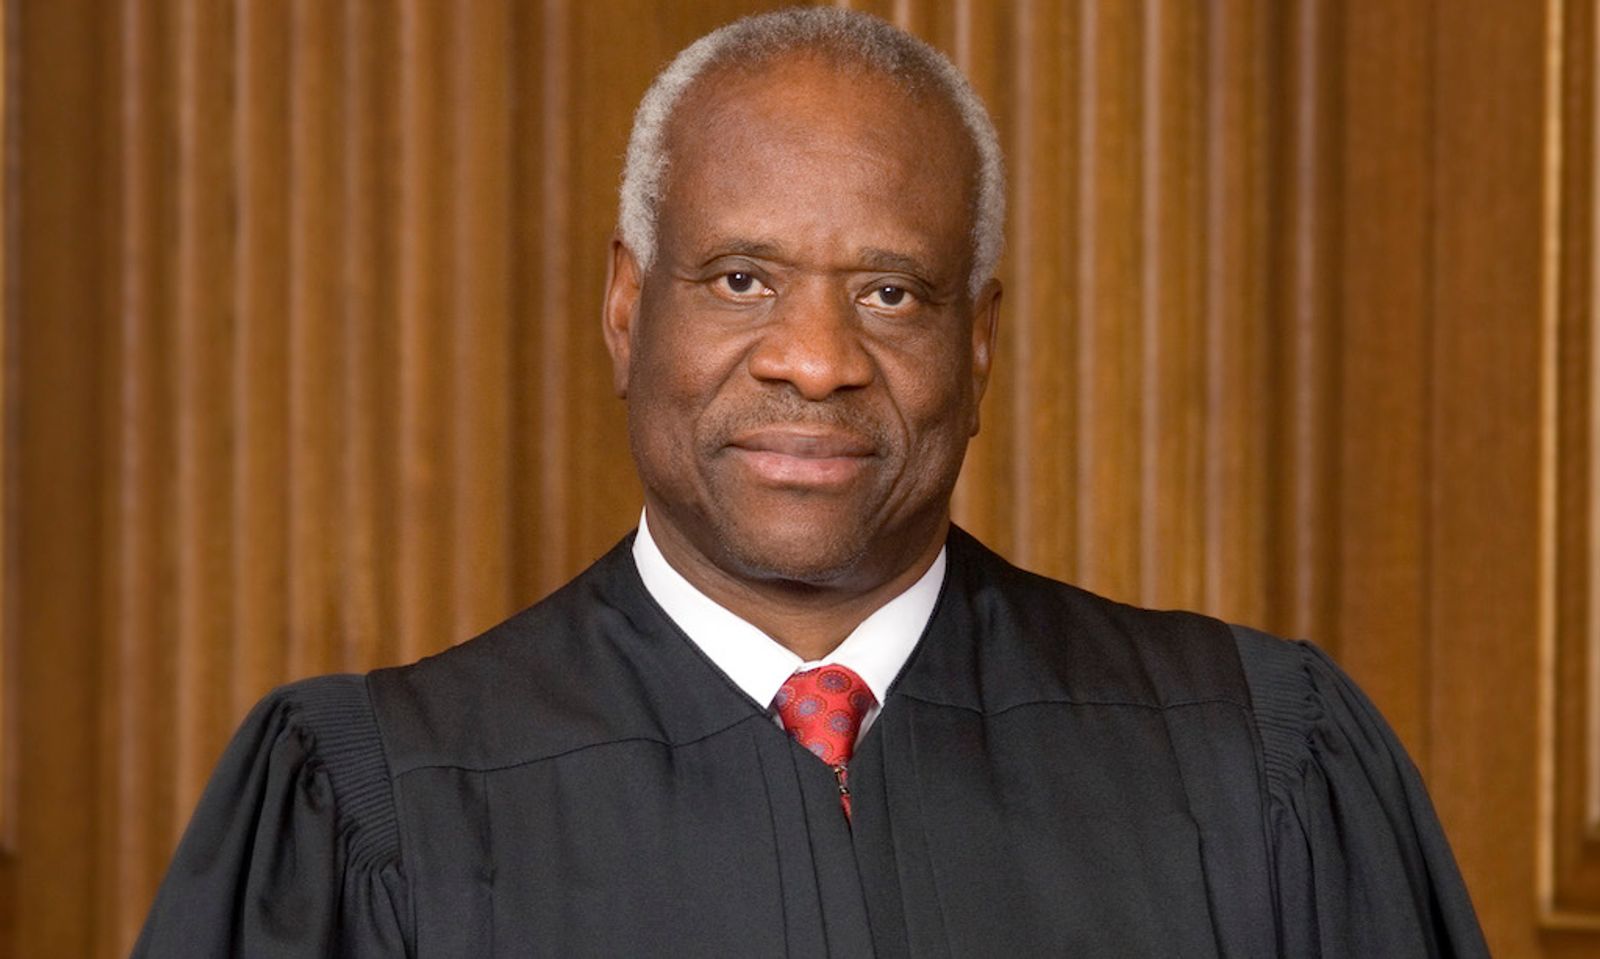 SCOTUS Justice Thomas Suggests Section 230 May Need ‘Paring Down’